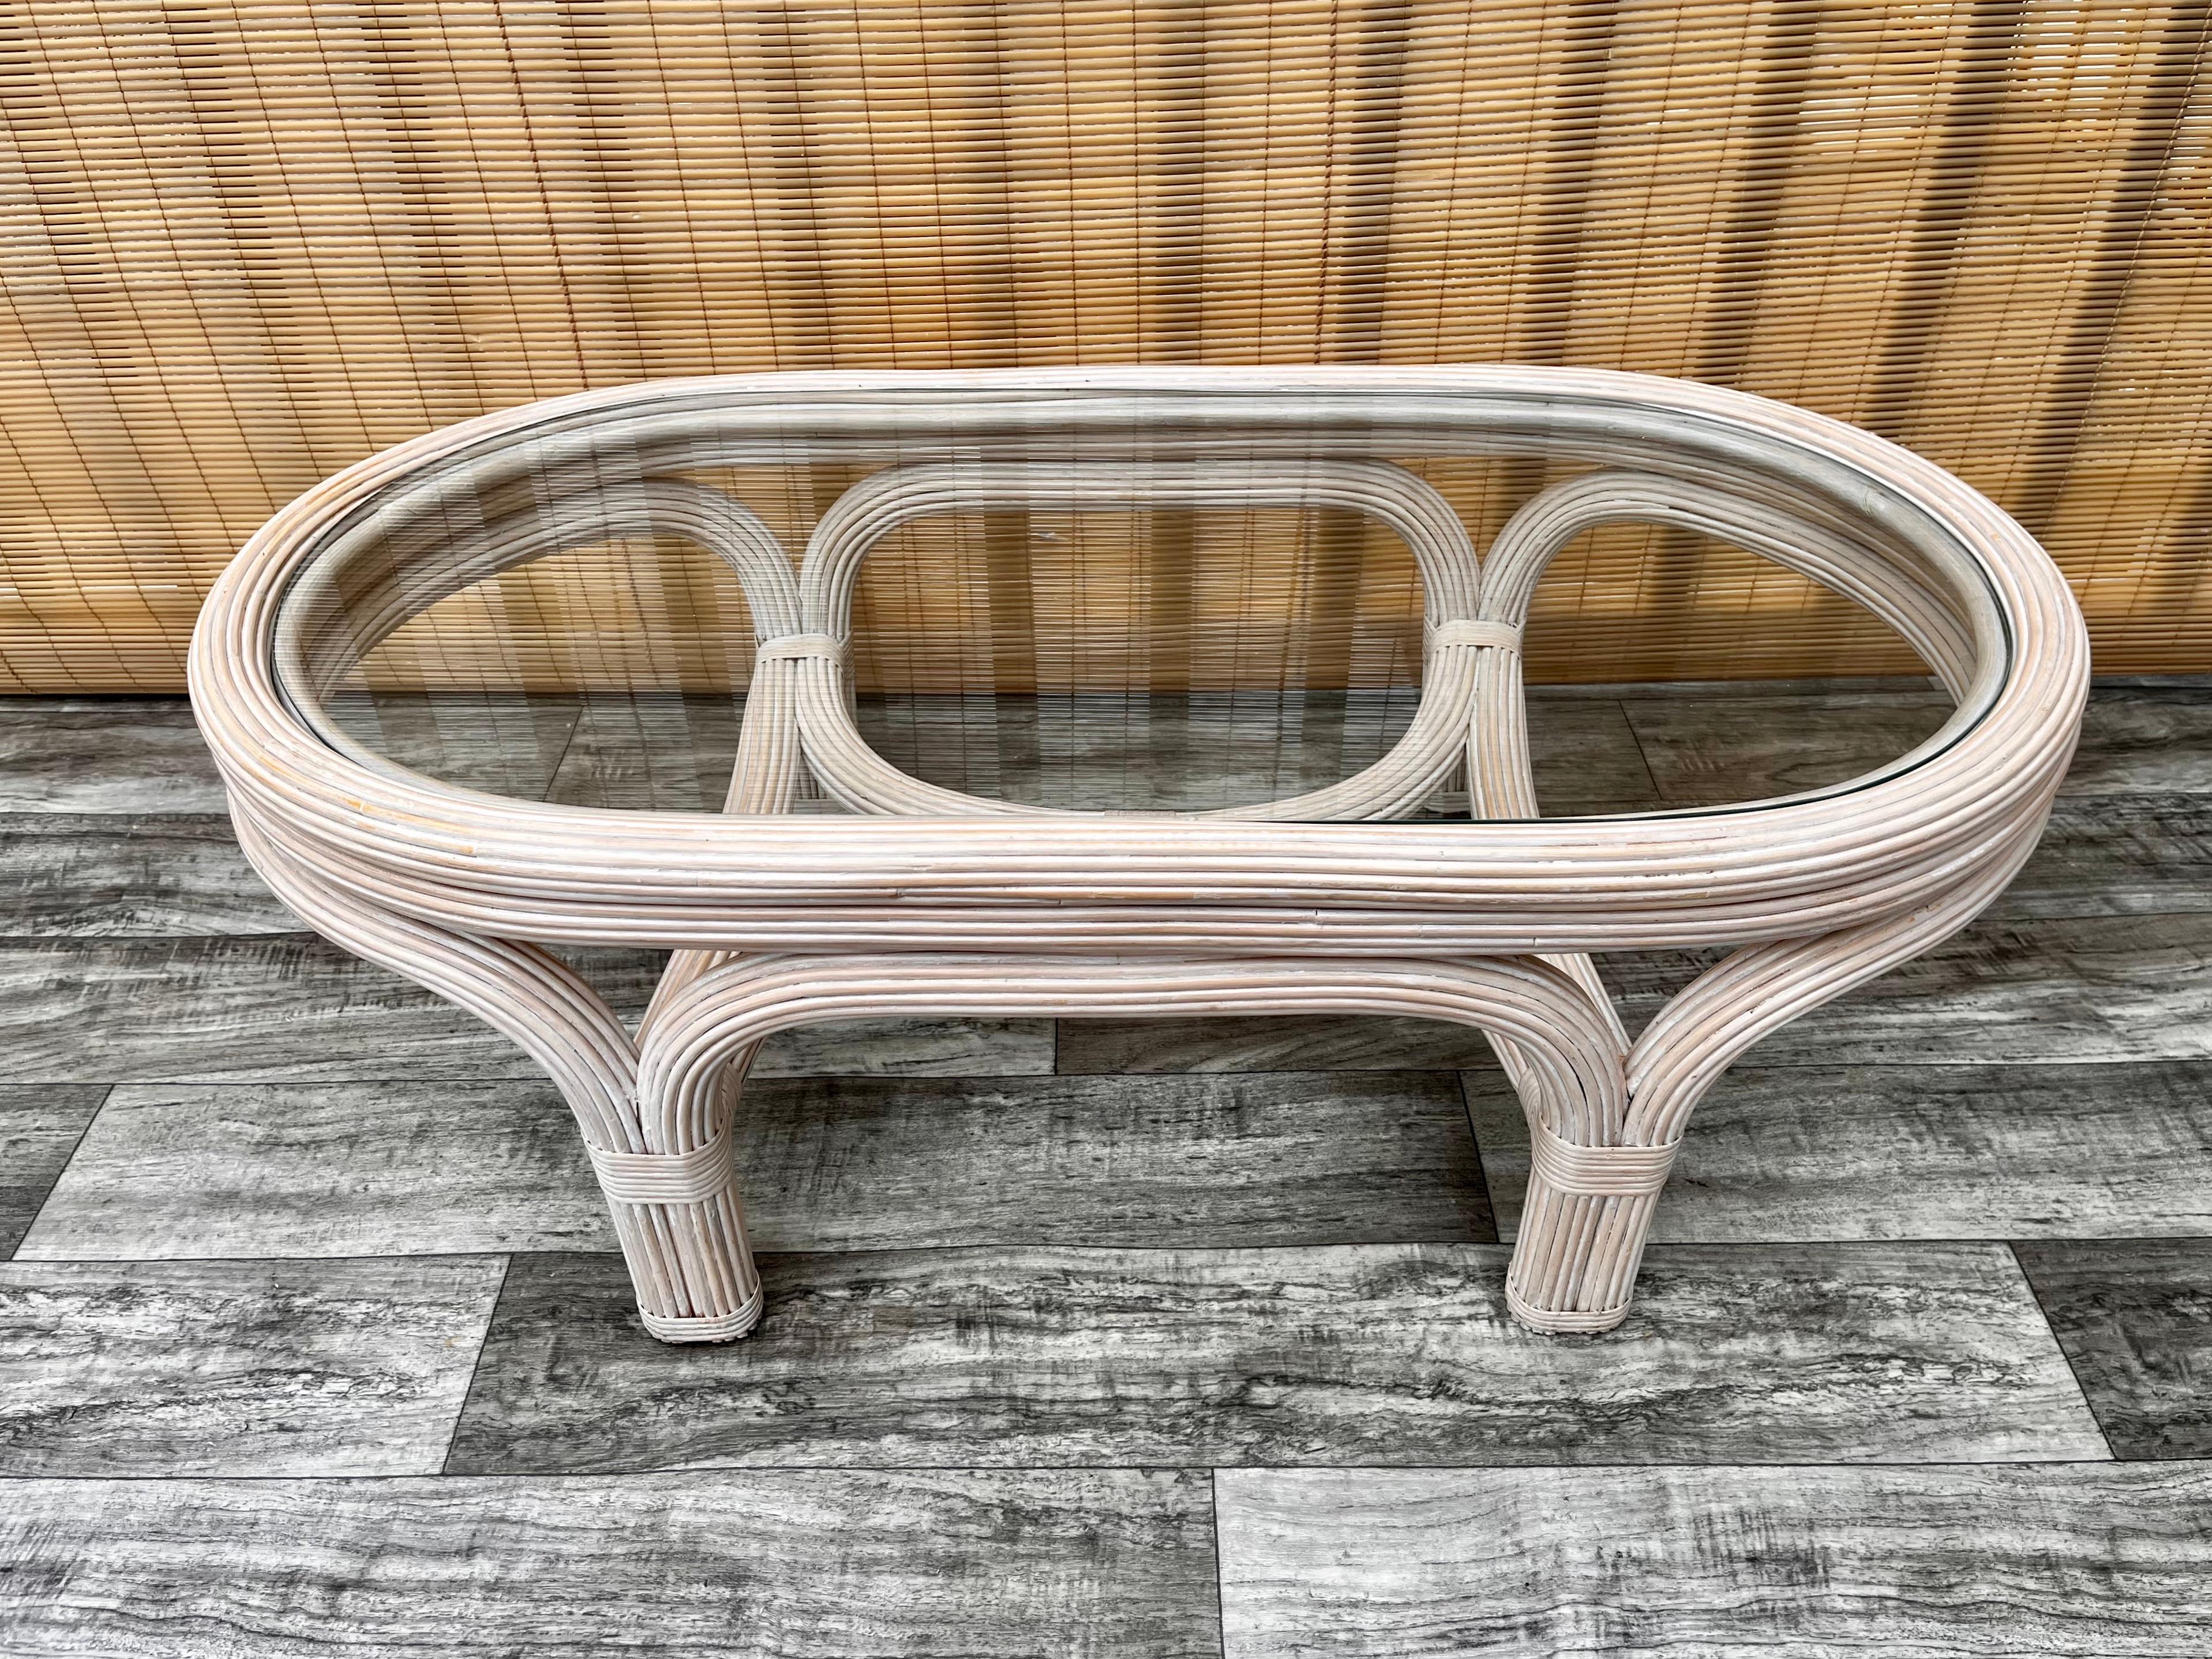 Vintage Coastal Style pencil reed coffee table in the Gabriella Crespi Style. circa 1980s 
Features sophisticated curves, an elegant rattan pencil reed construction in white washed finish and an oval glass top.
In excellent near mint original